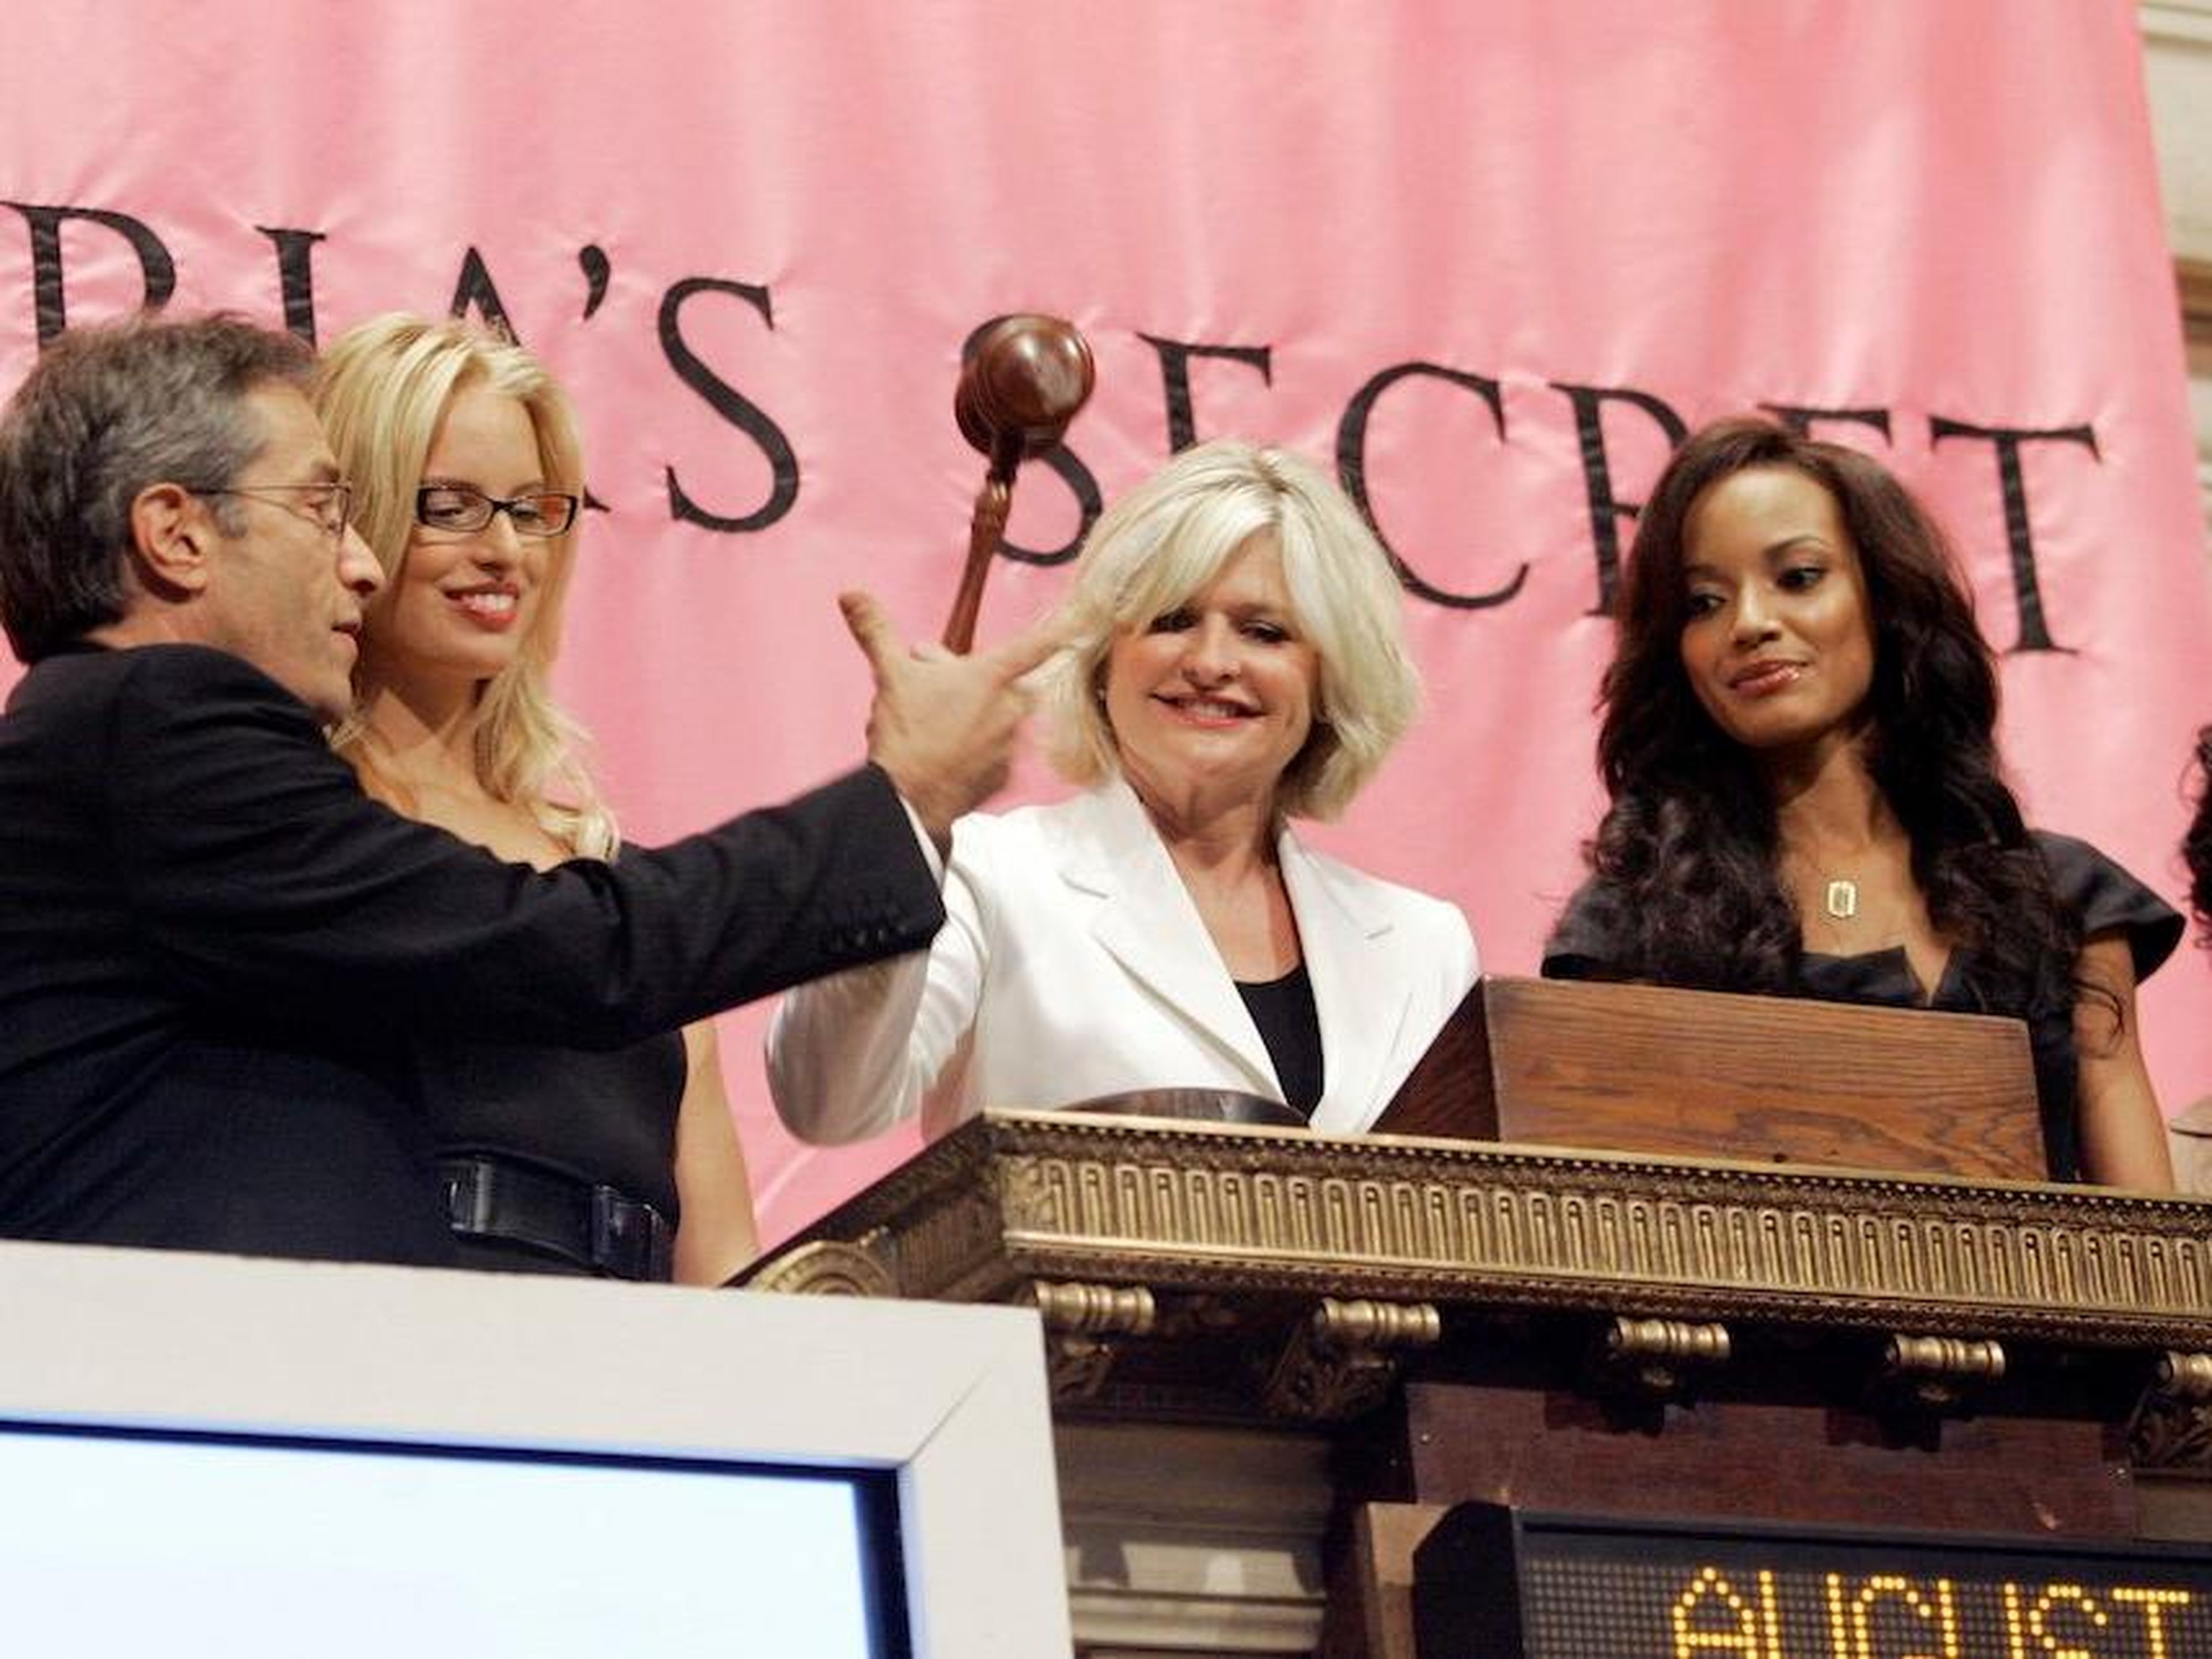 In 2000, Sharen Jester Turney came on as CEO of Victoria's Secret Direct, heading up its catalog business.